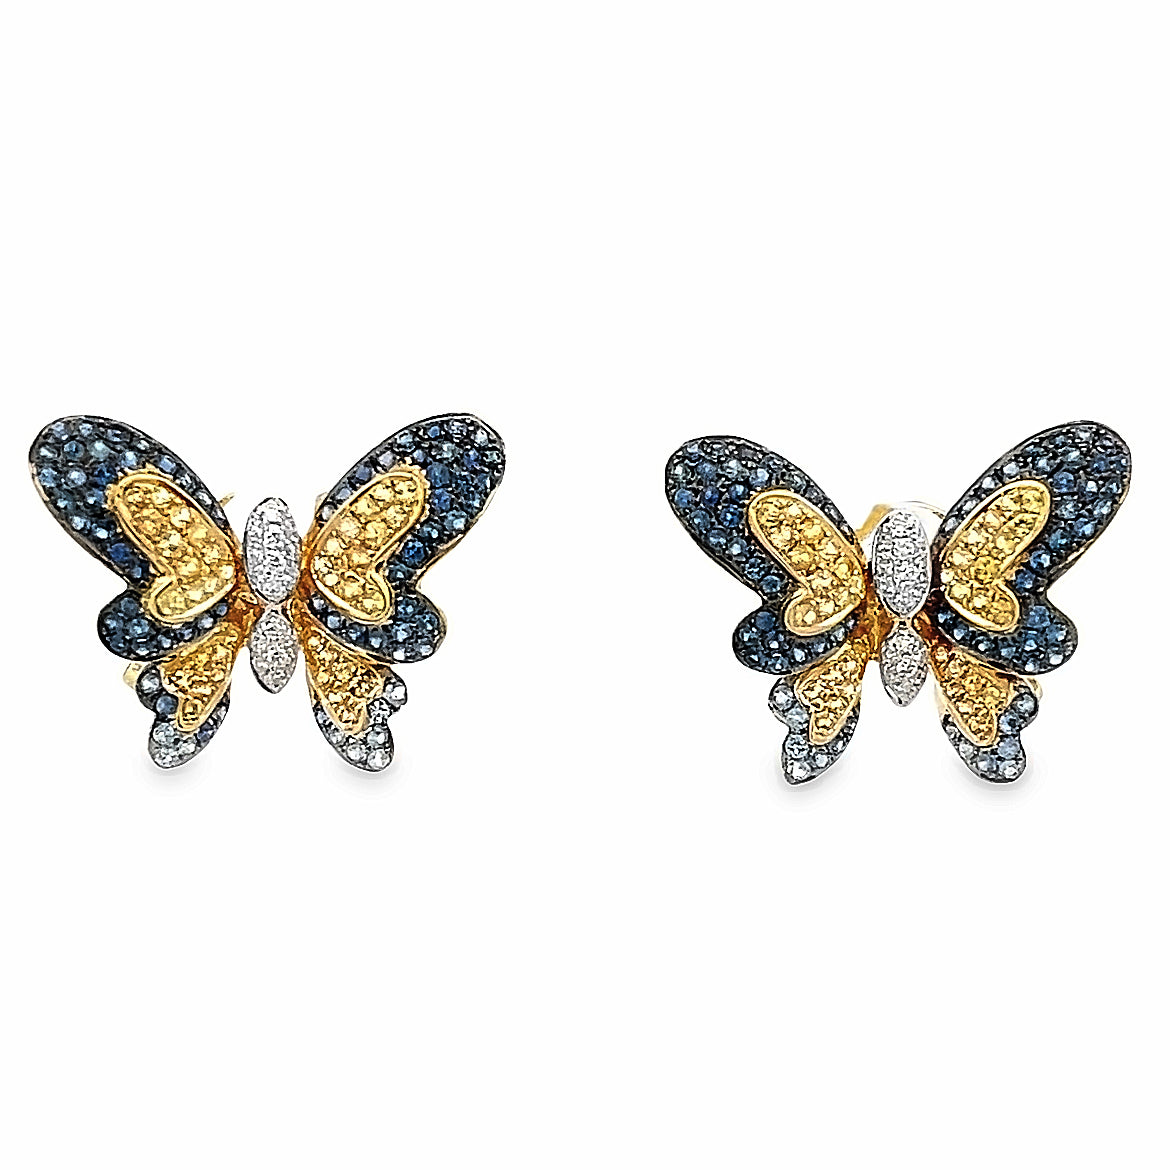 18K GOLD BUTTERFLY EARRINGS WITH YELLOW AND BLUE SAPPHIRE